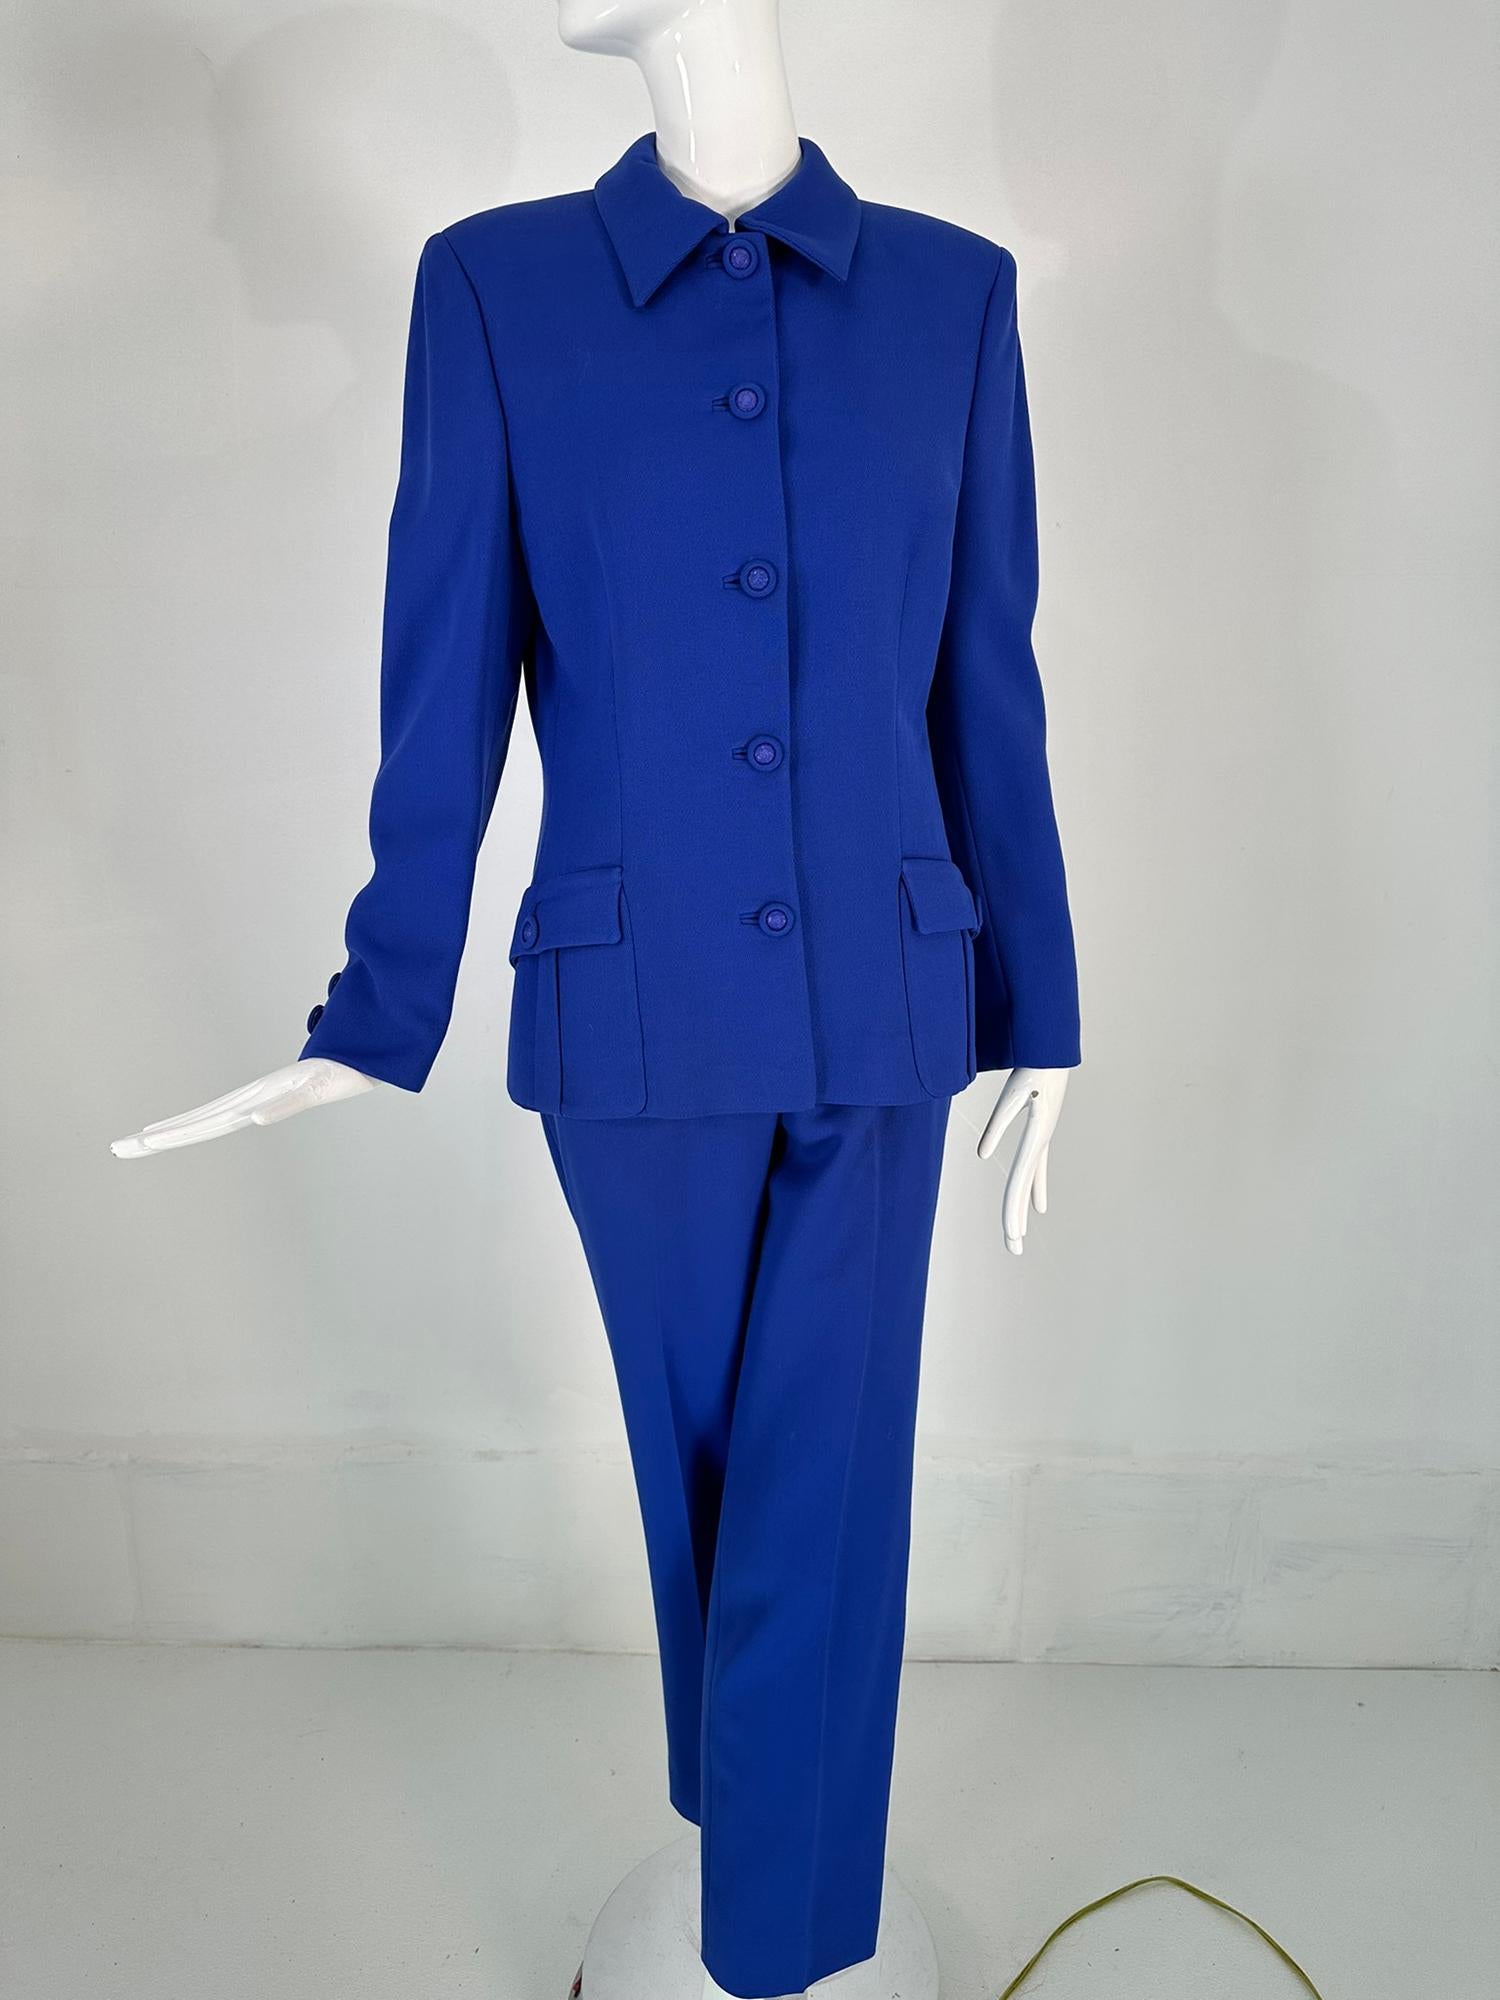 Gianni Versace Couture F/W 1995 Royal Blue Wool Pant Suit  For Sale 7